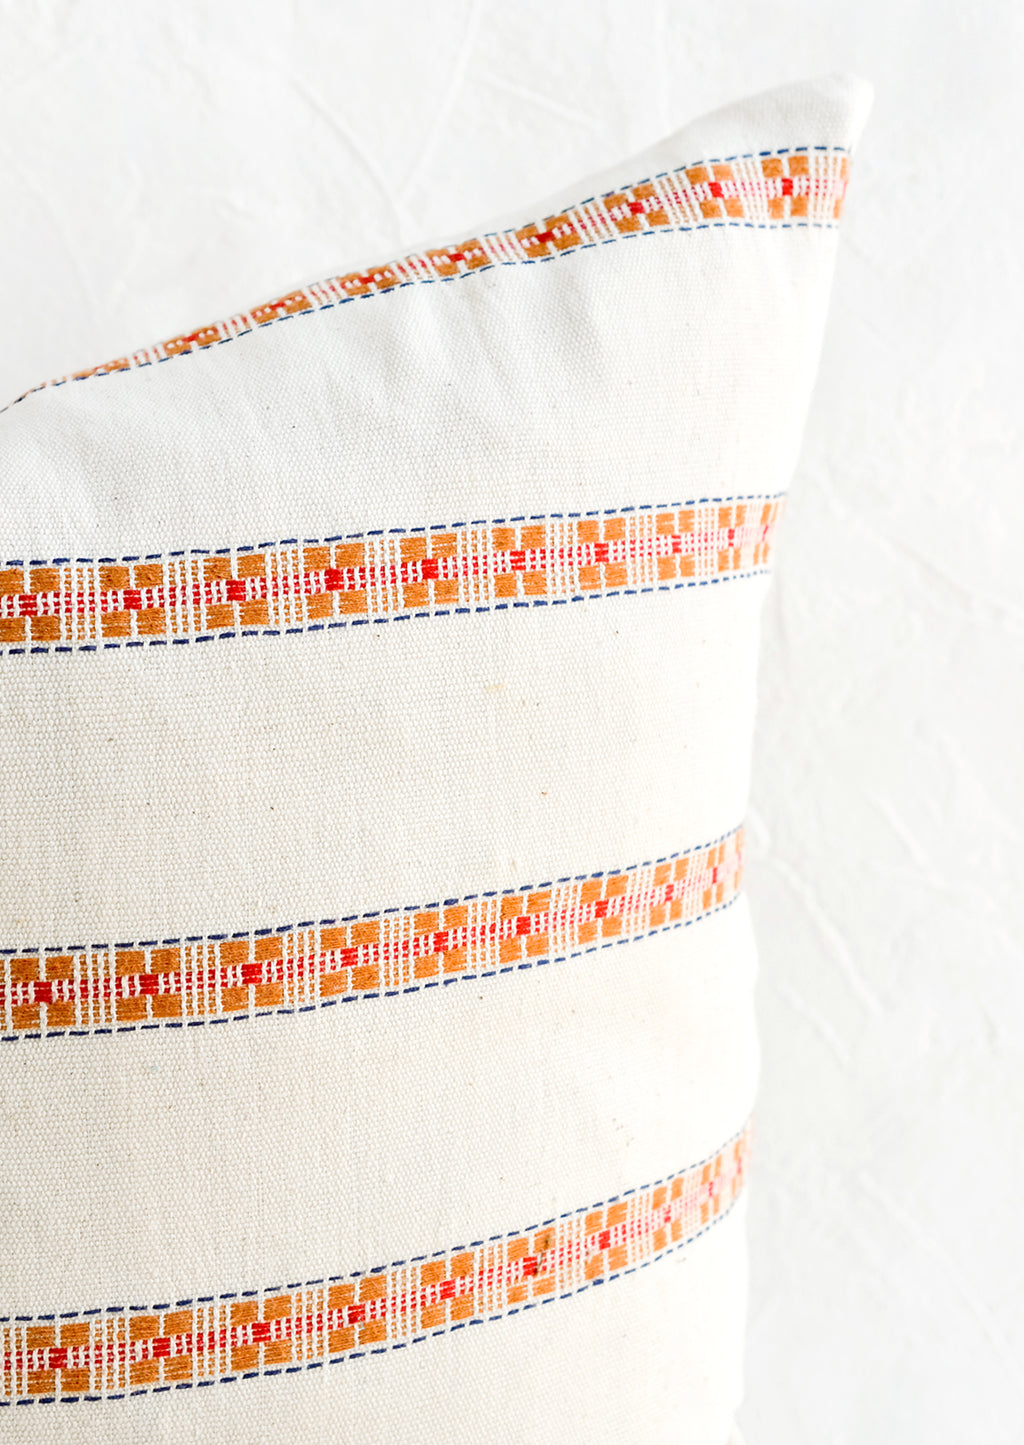 2: Intricate, geometric embroidery detailing on cotton throw pillow.